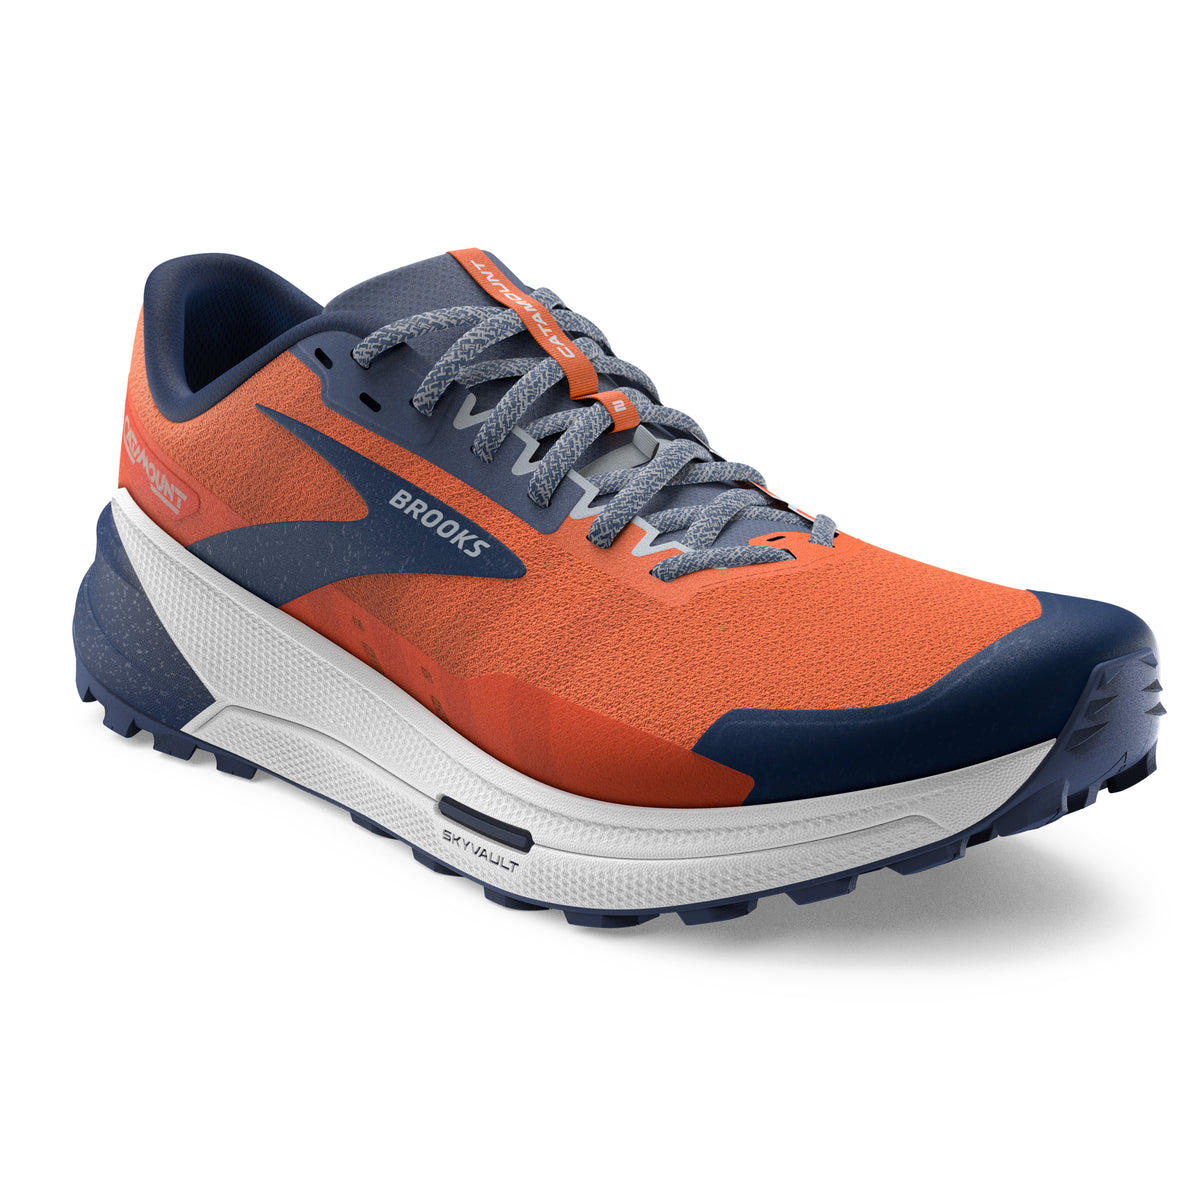 Catamount 2 Men's Trail Running Shoes